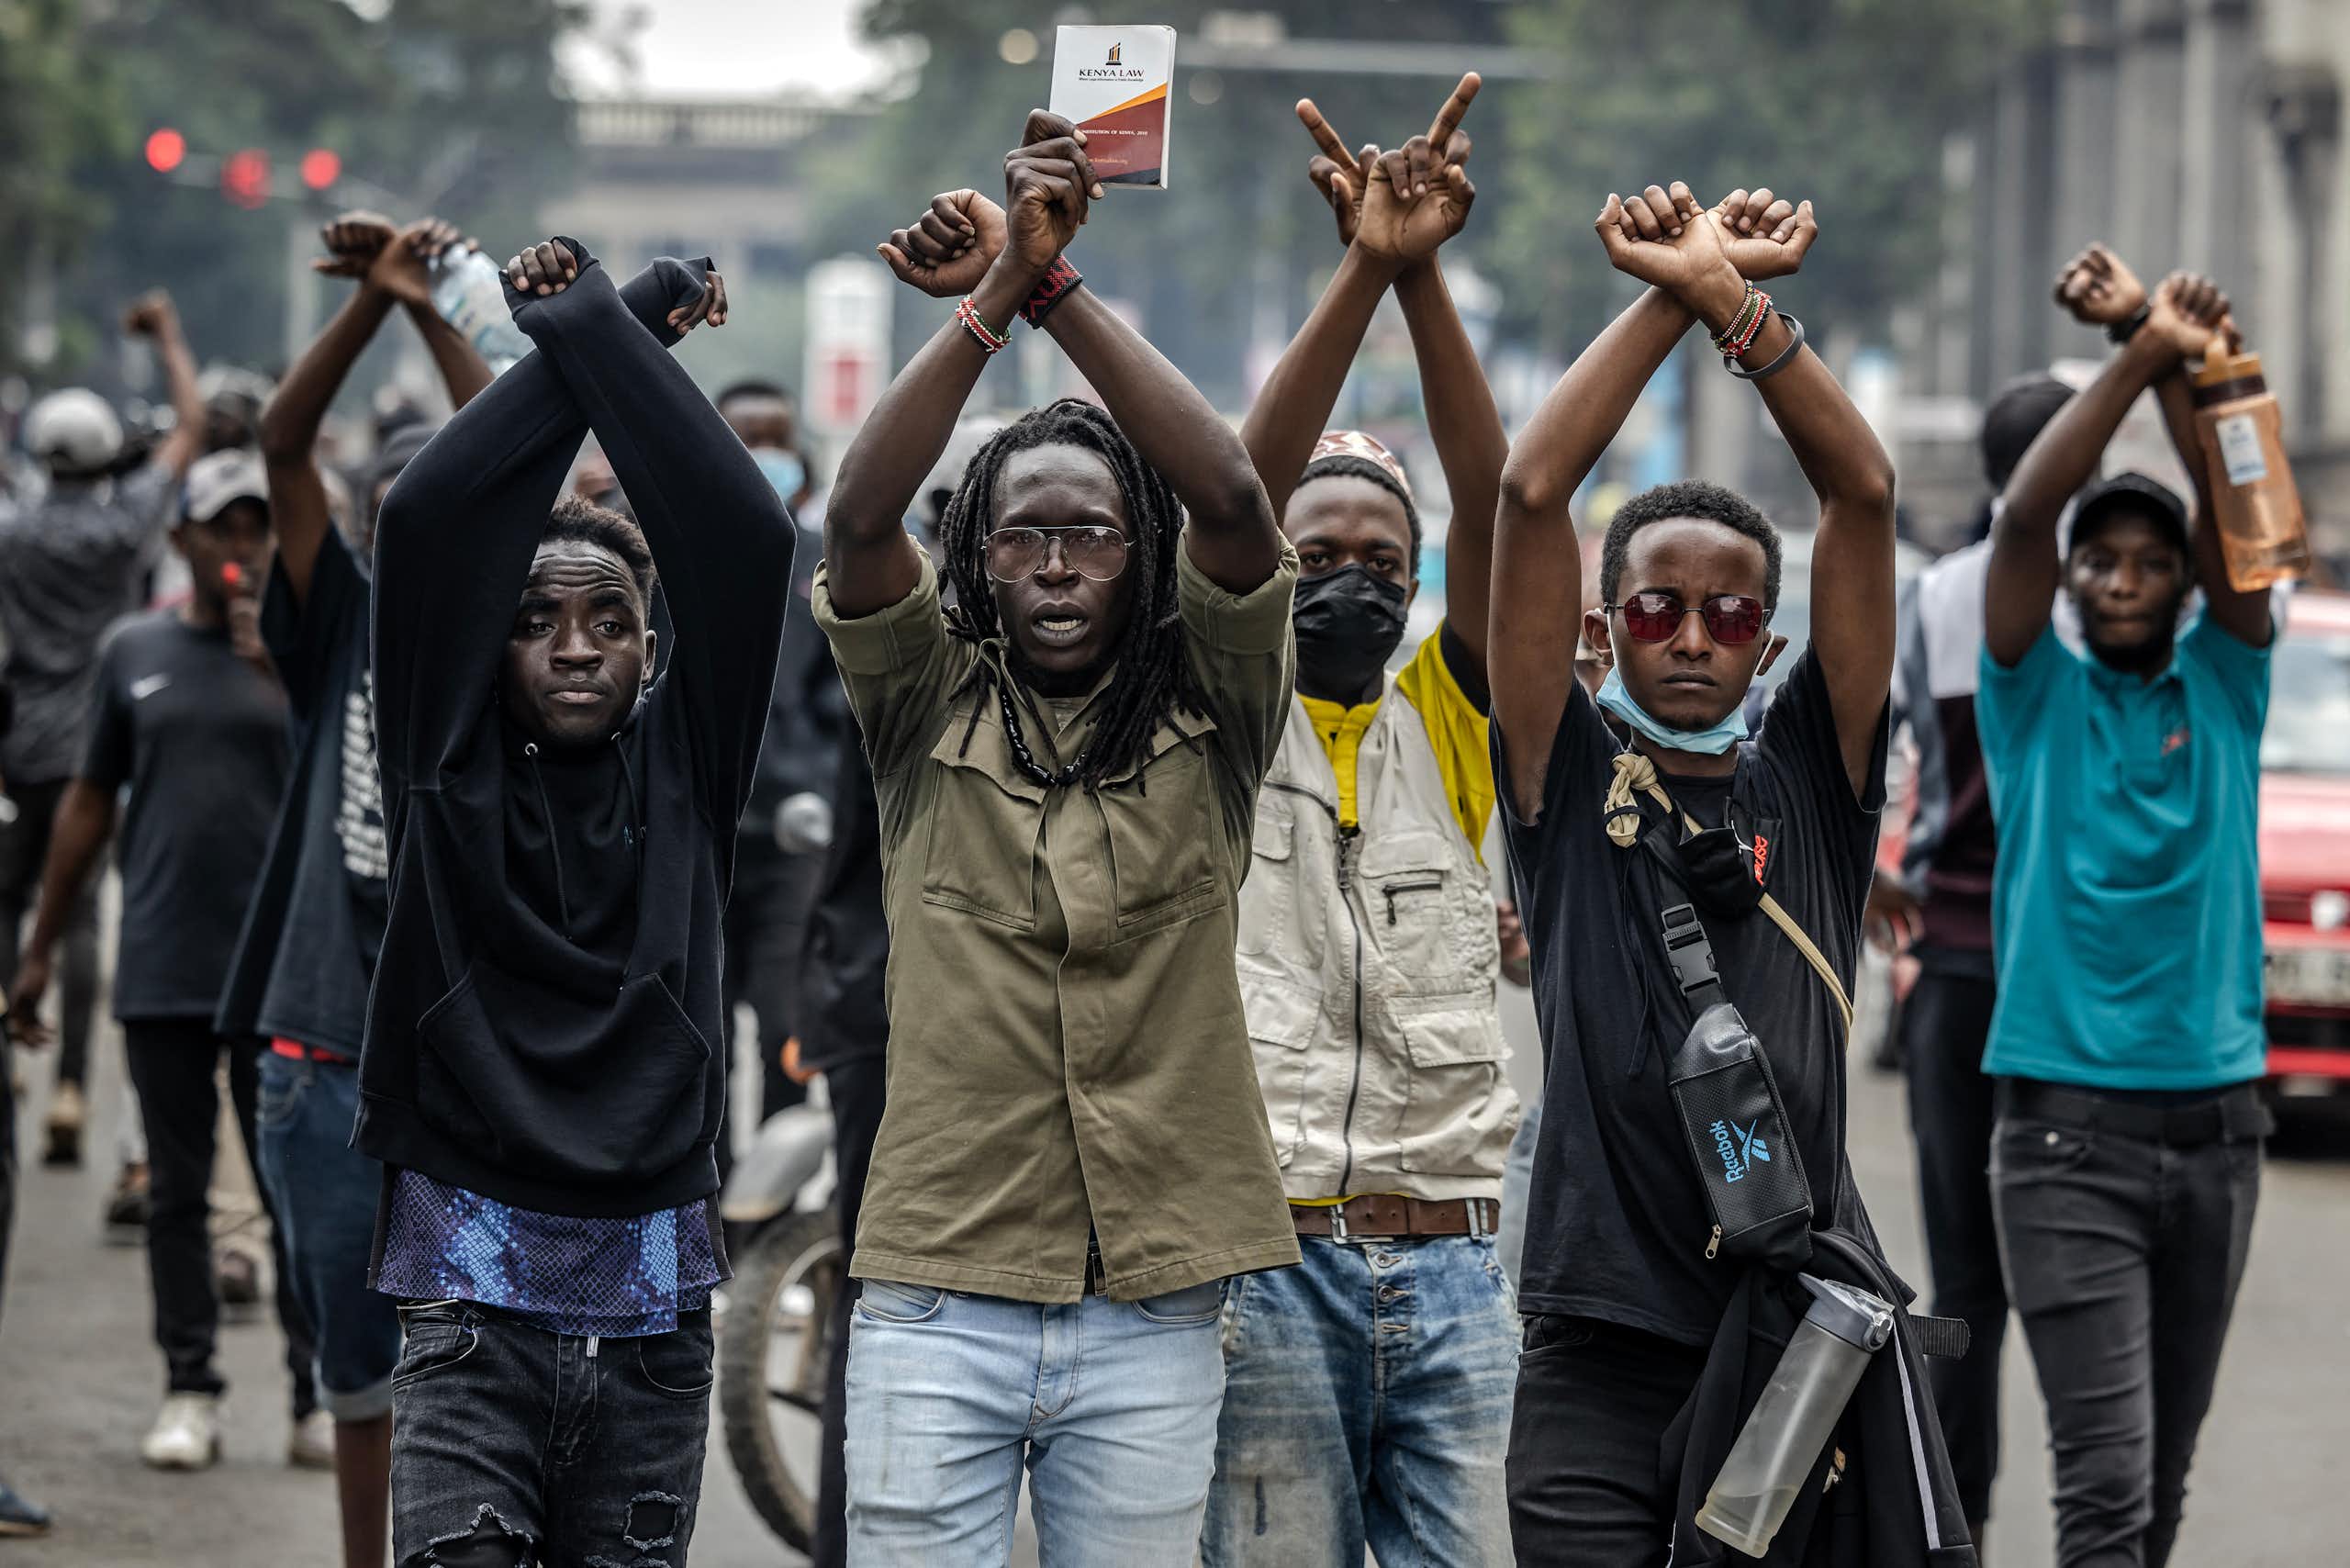 Kenya protests: Gen Z shows the power of digital activism - driving change from screens to the streets